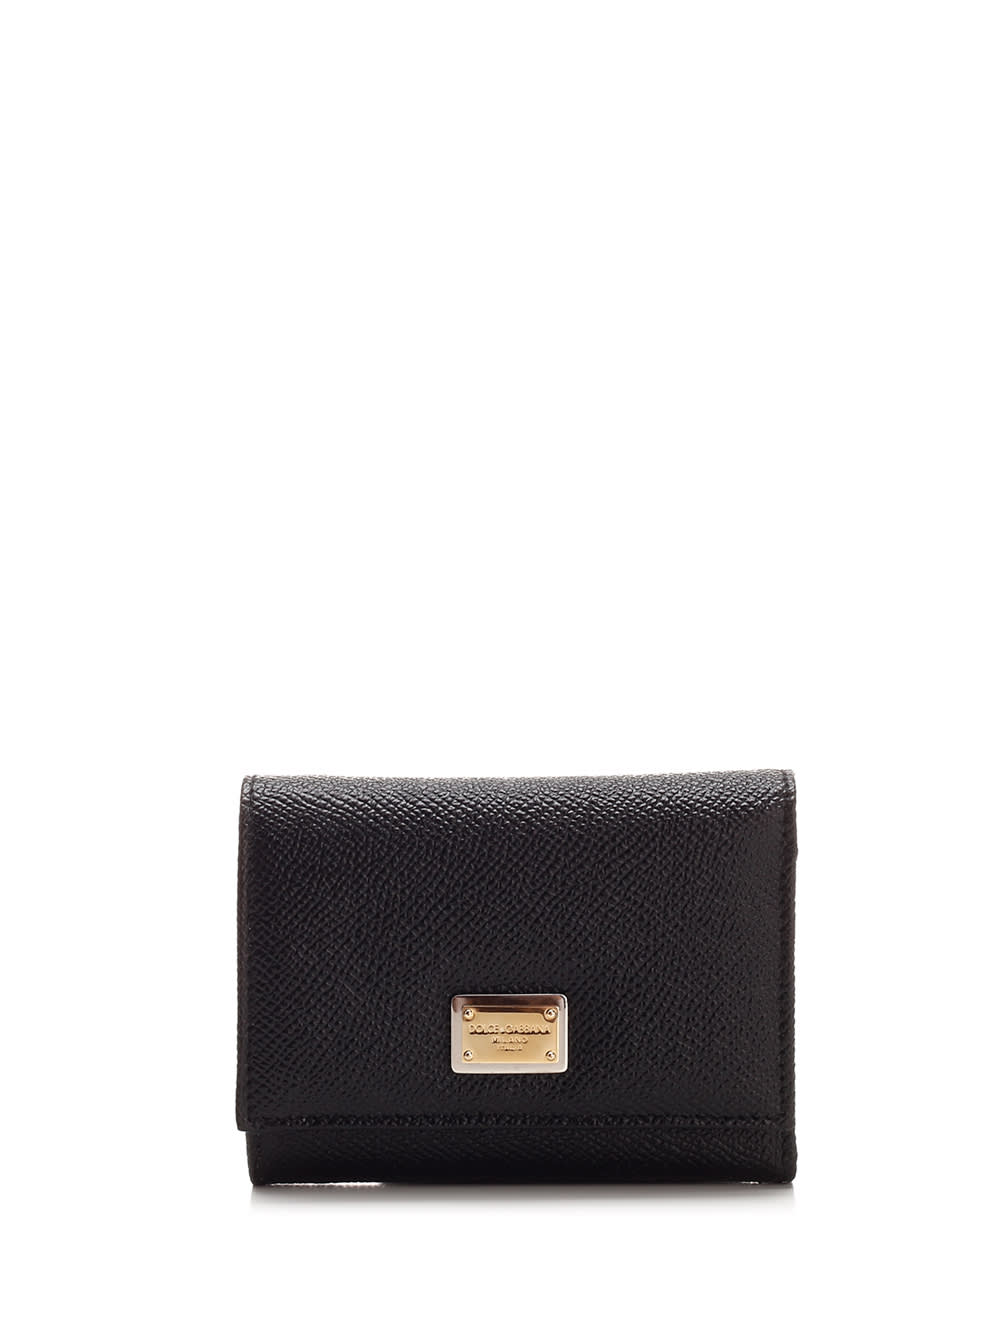 Dolce & Gabbana Compact Trifold Wallet In Black